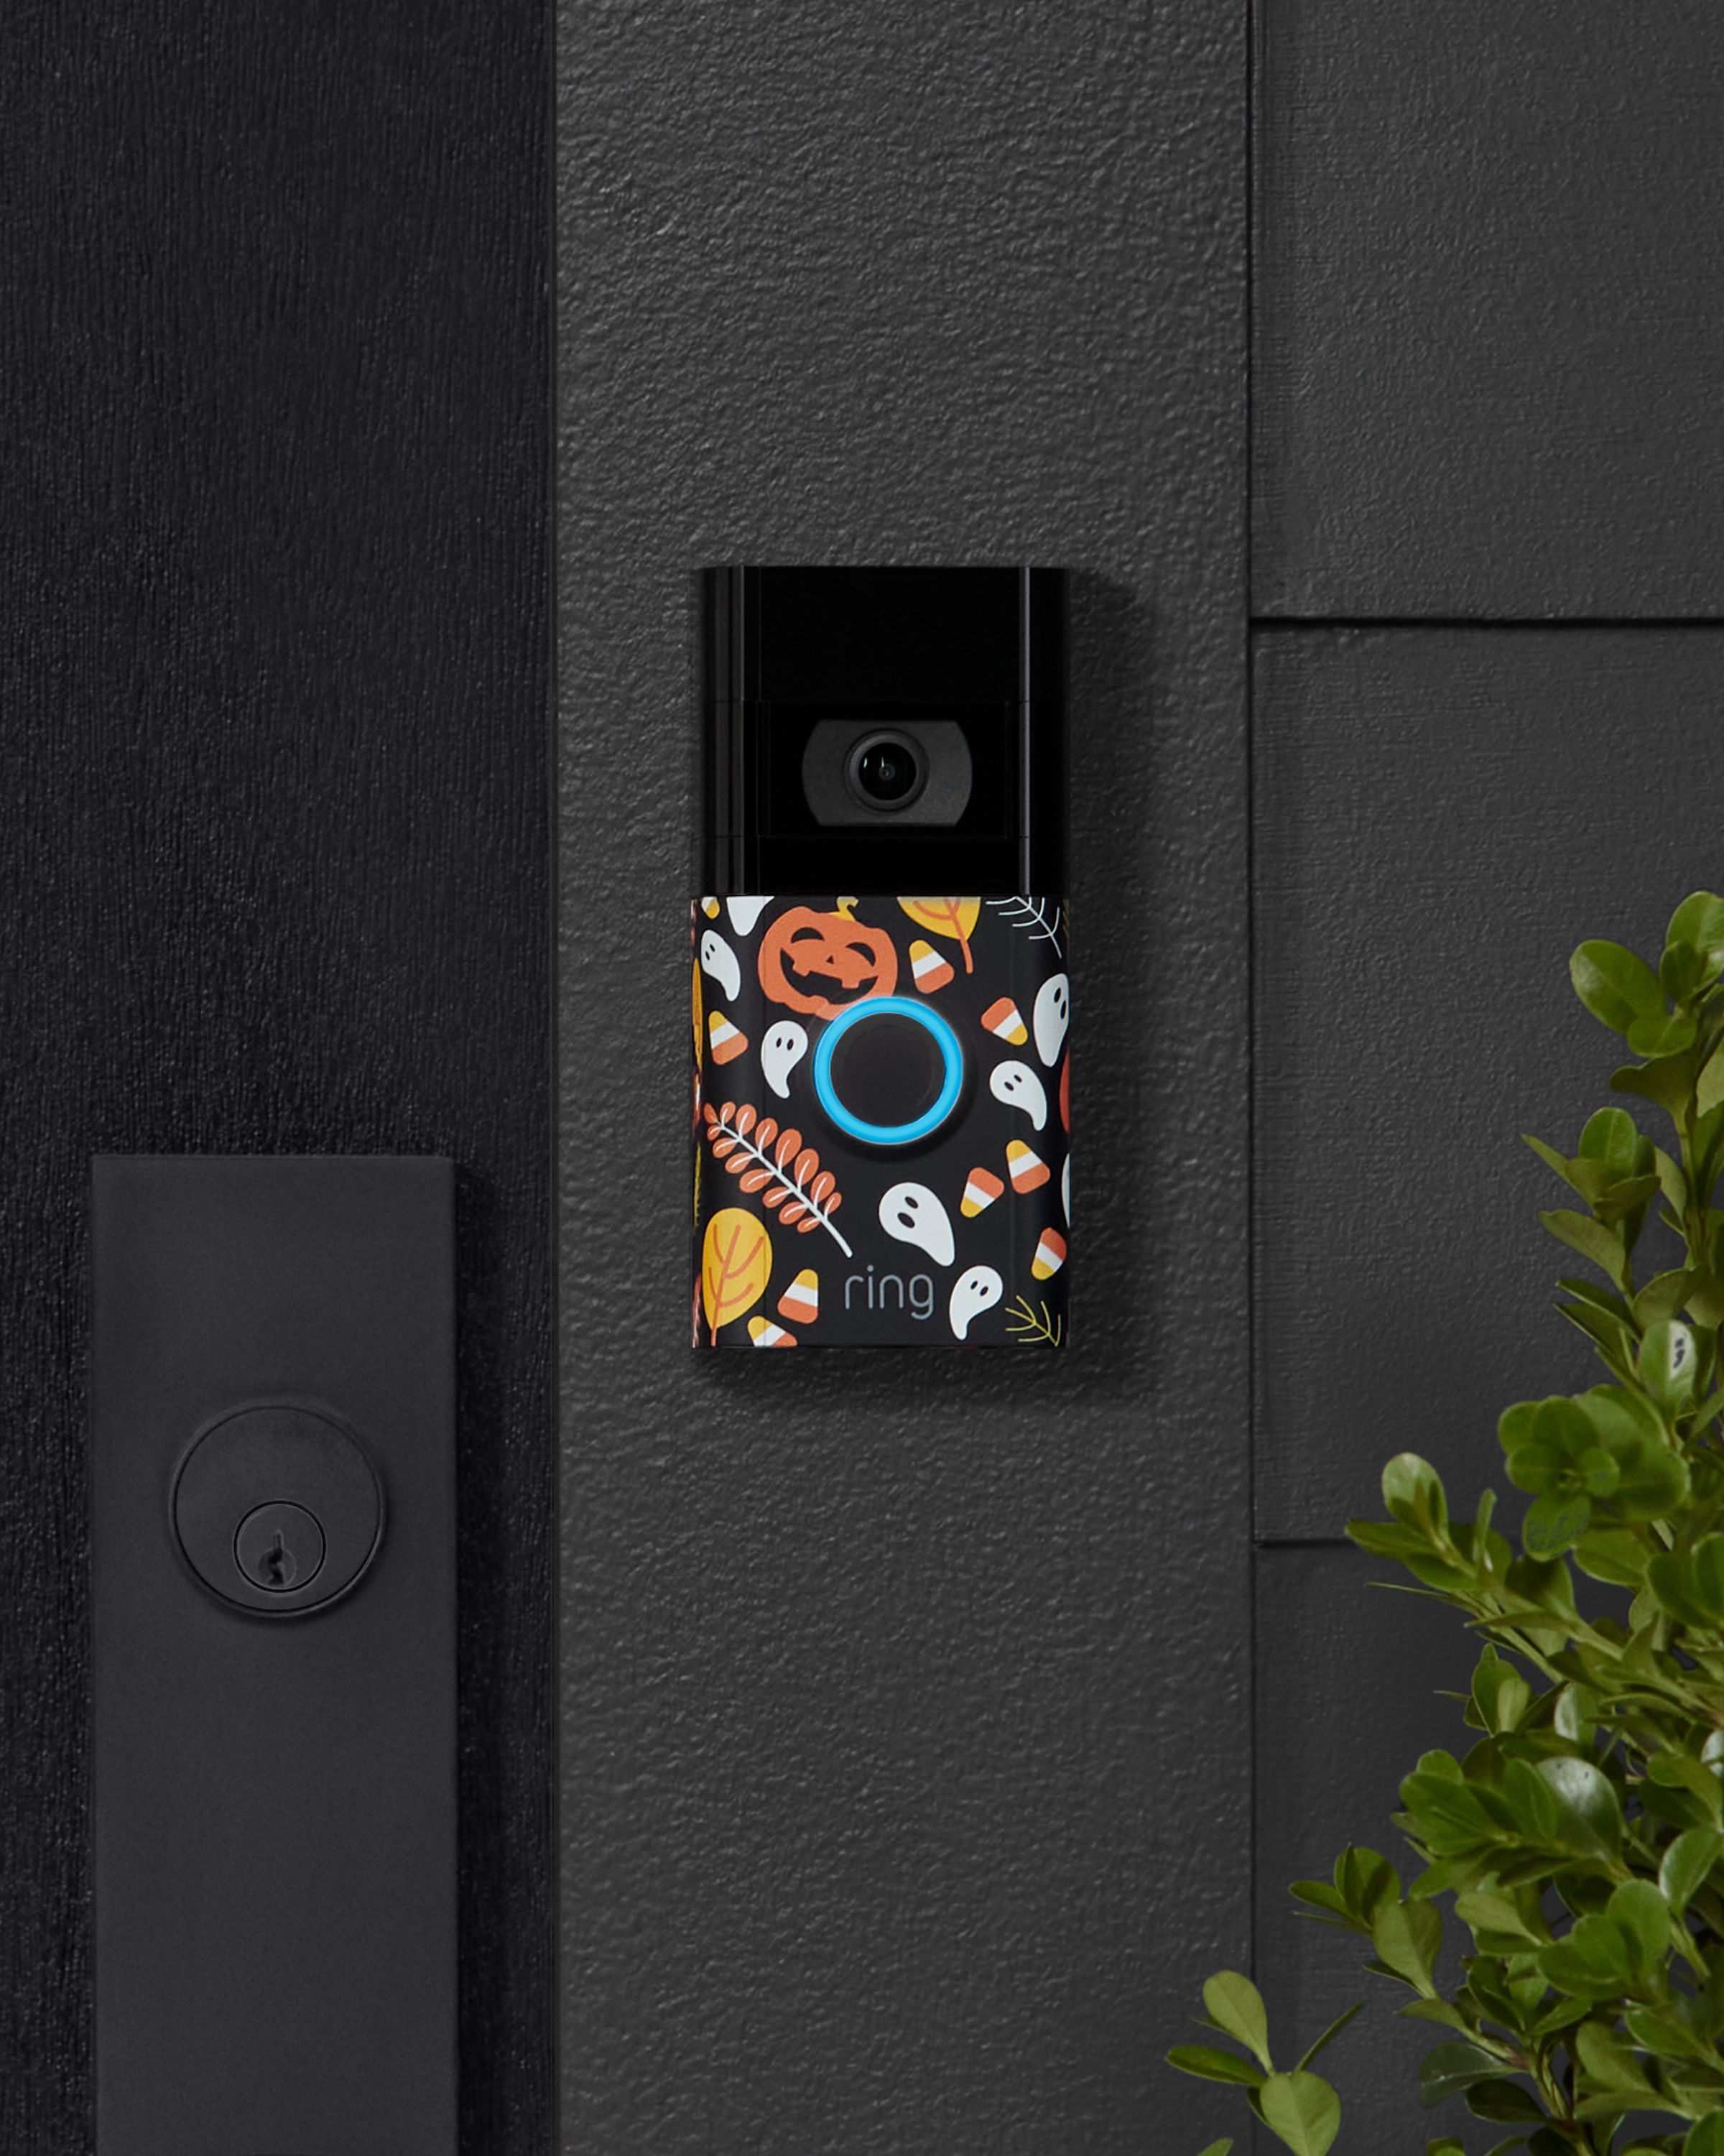 Ring wants to help you decorate your front door this season.